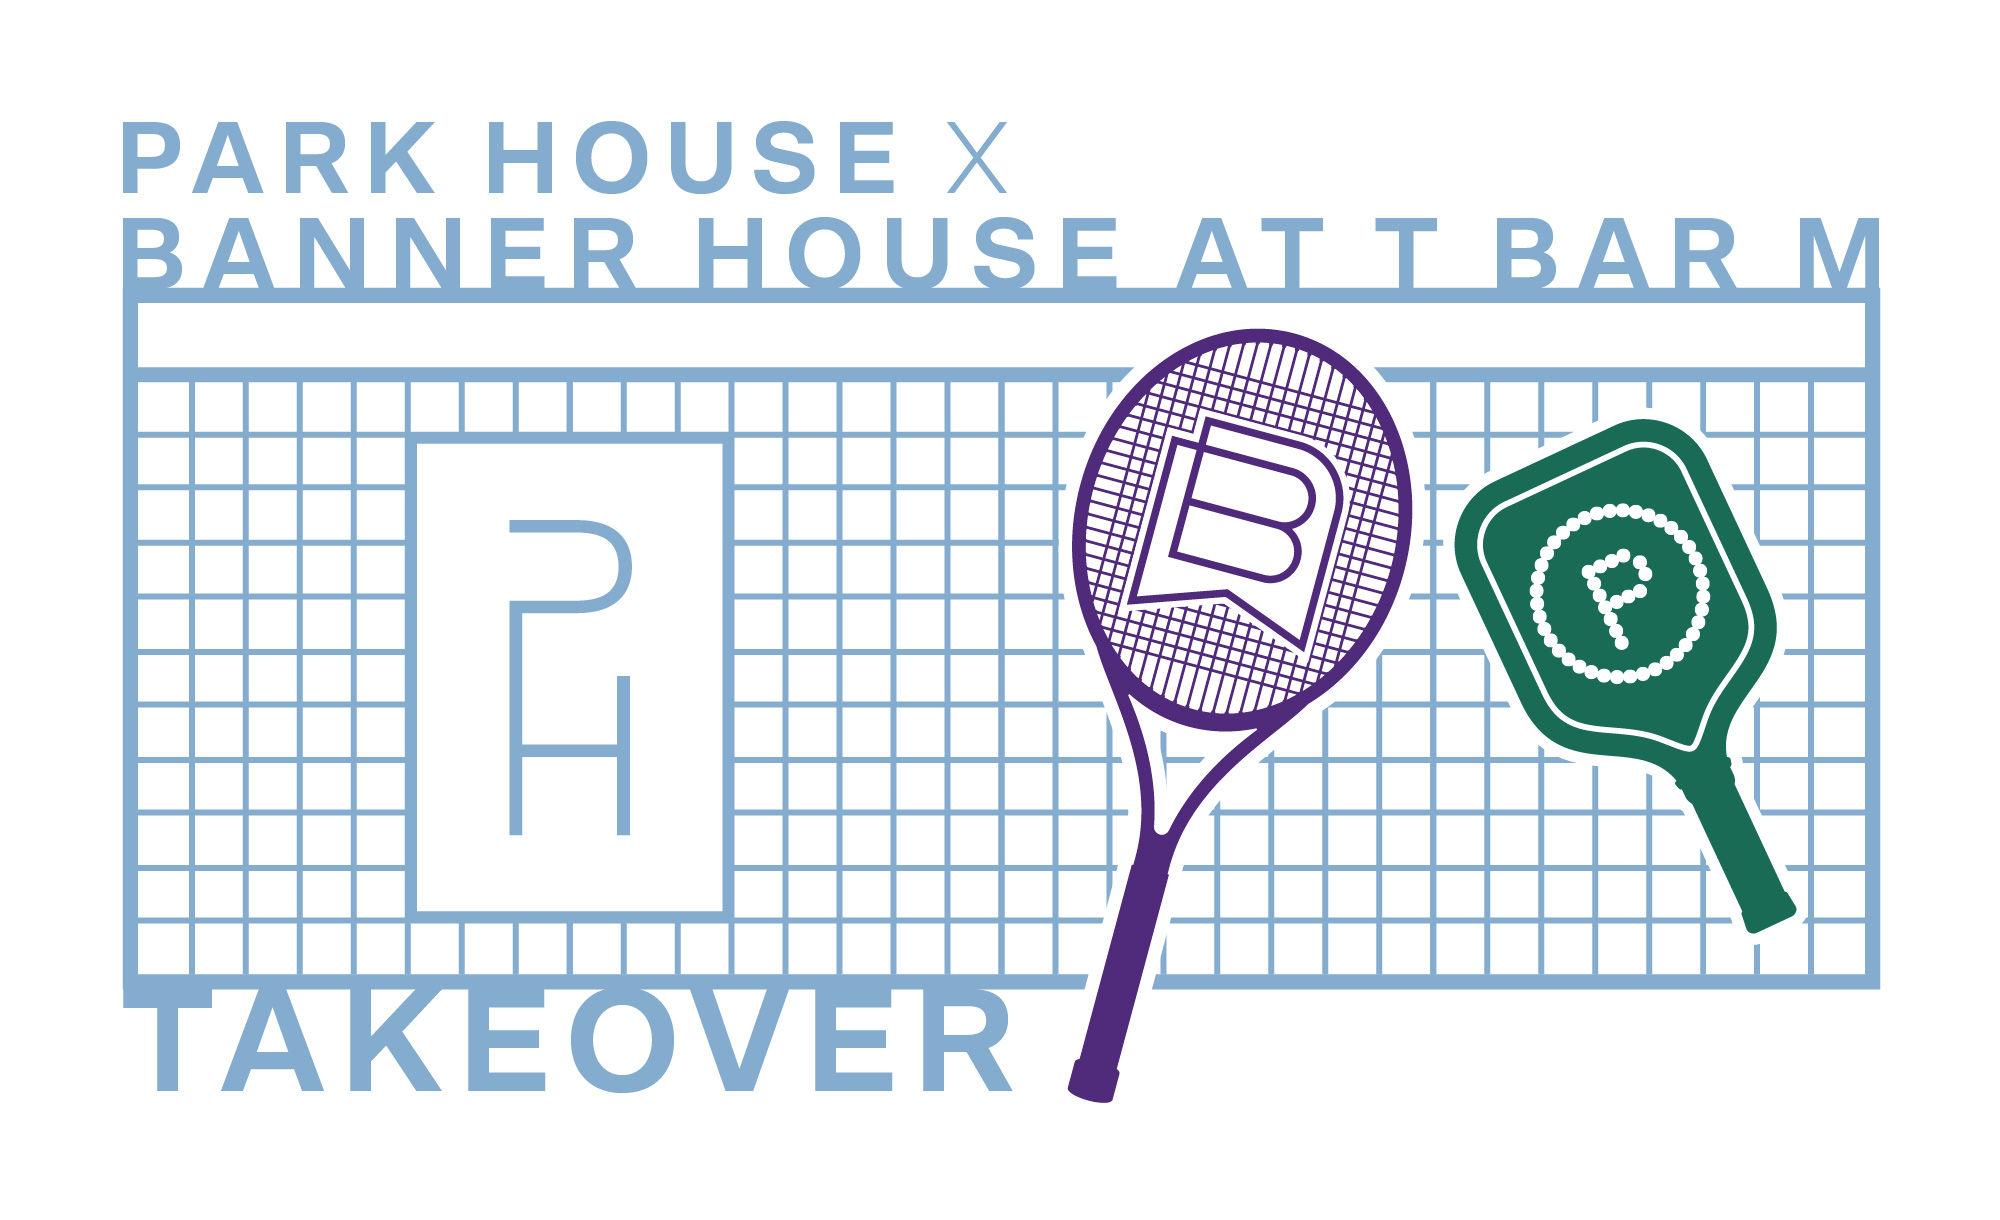 Park House x Banner House at T Bar M Takeover - SOLD OUT!